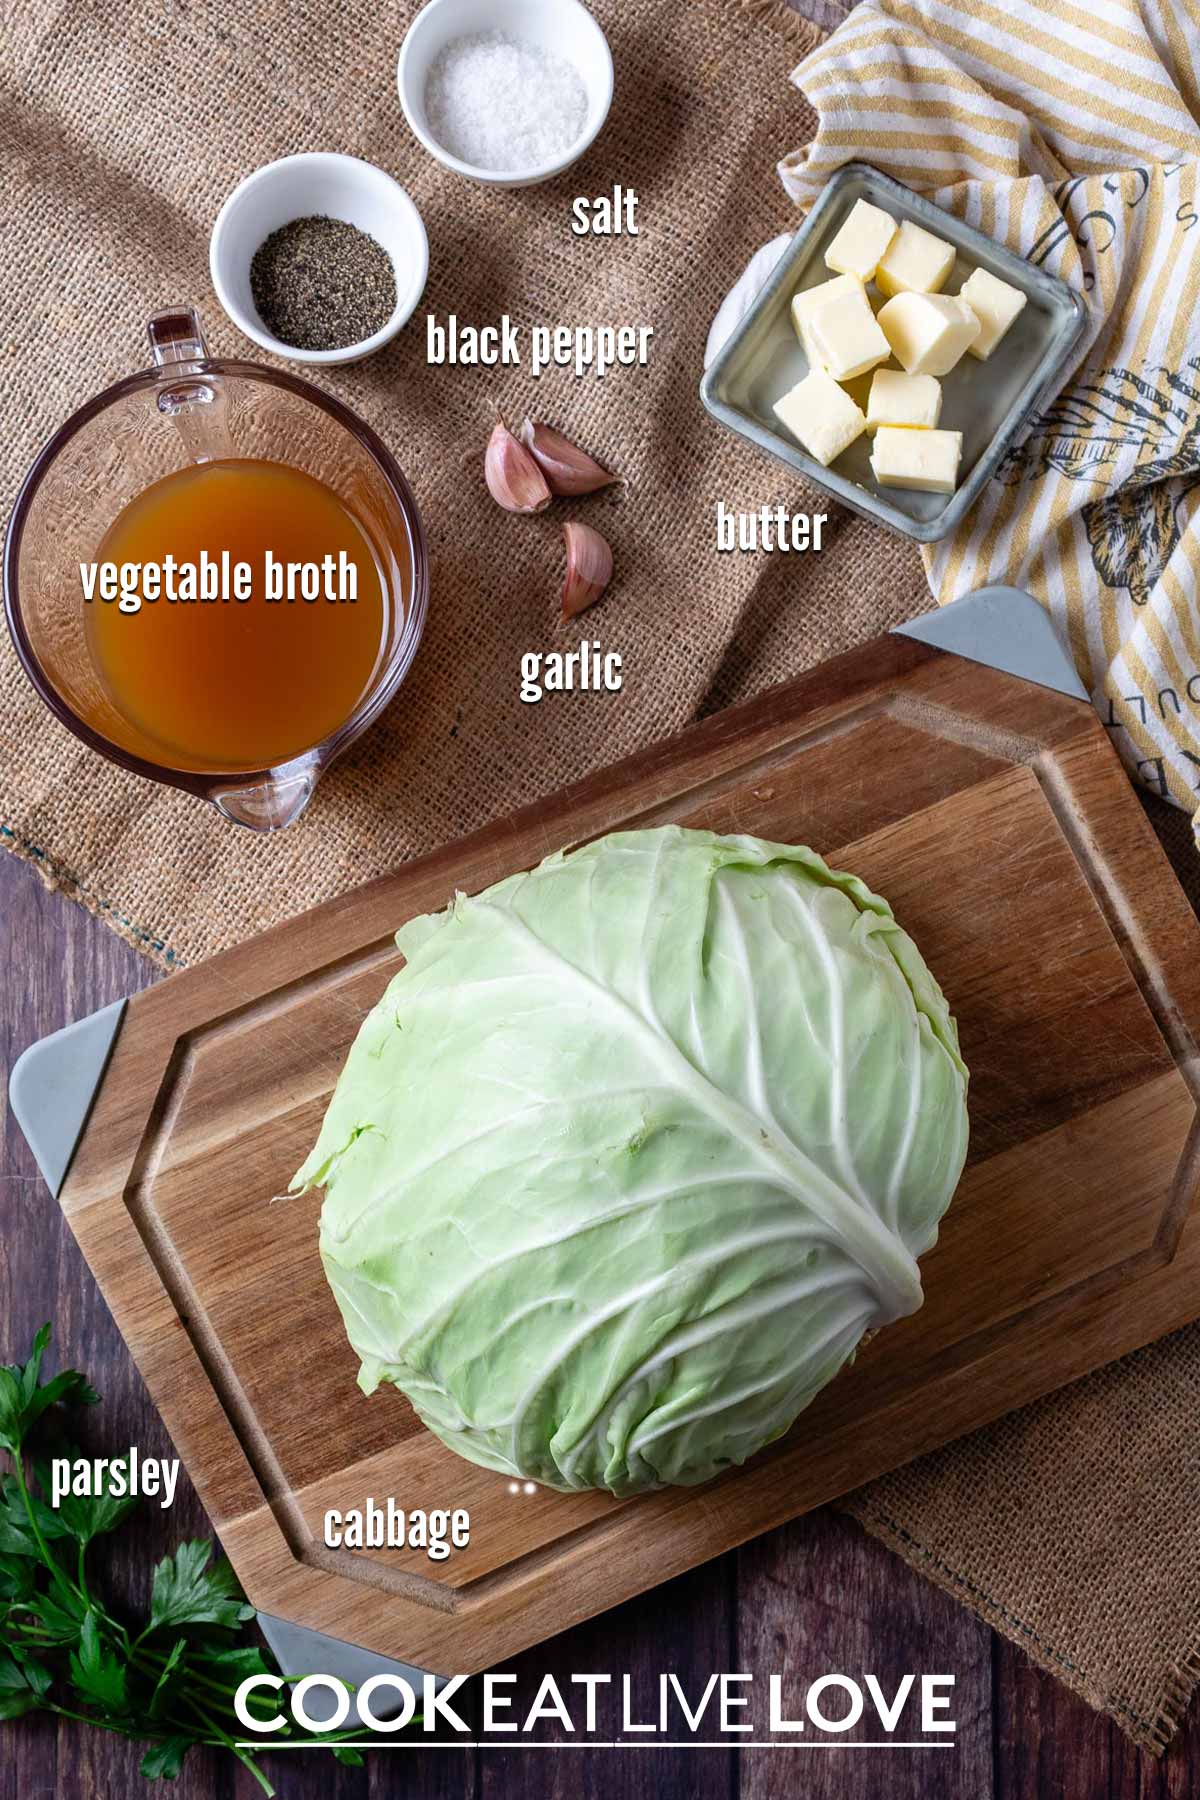 Ingredients to make cabbage in the instant pot on the table before cooking.